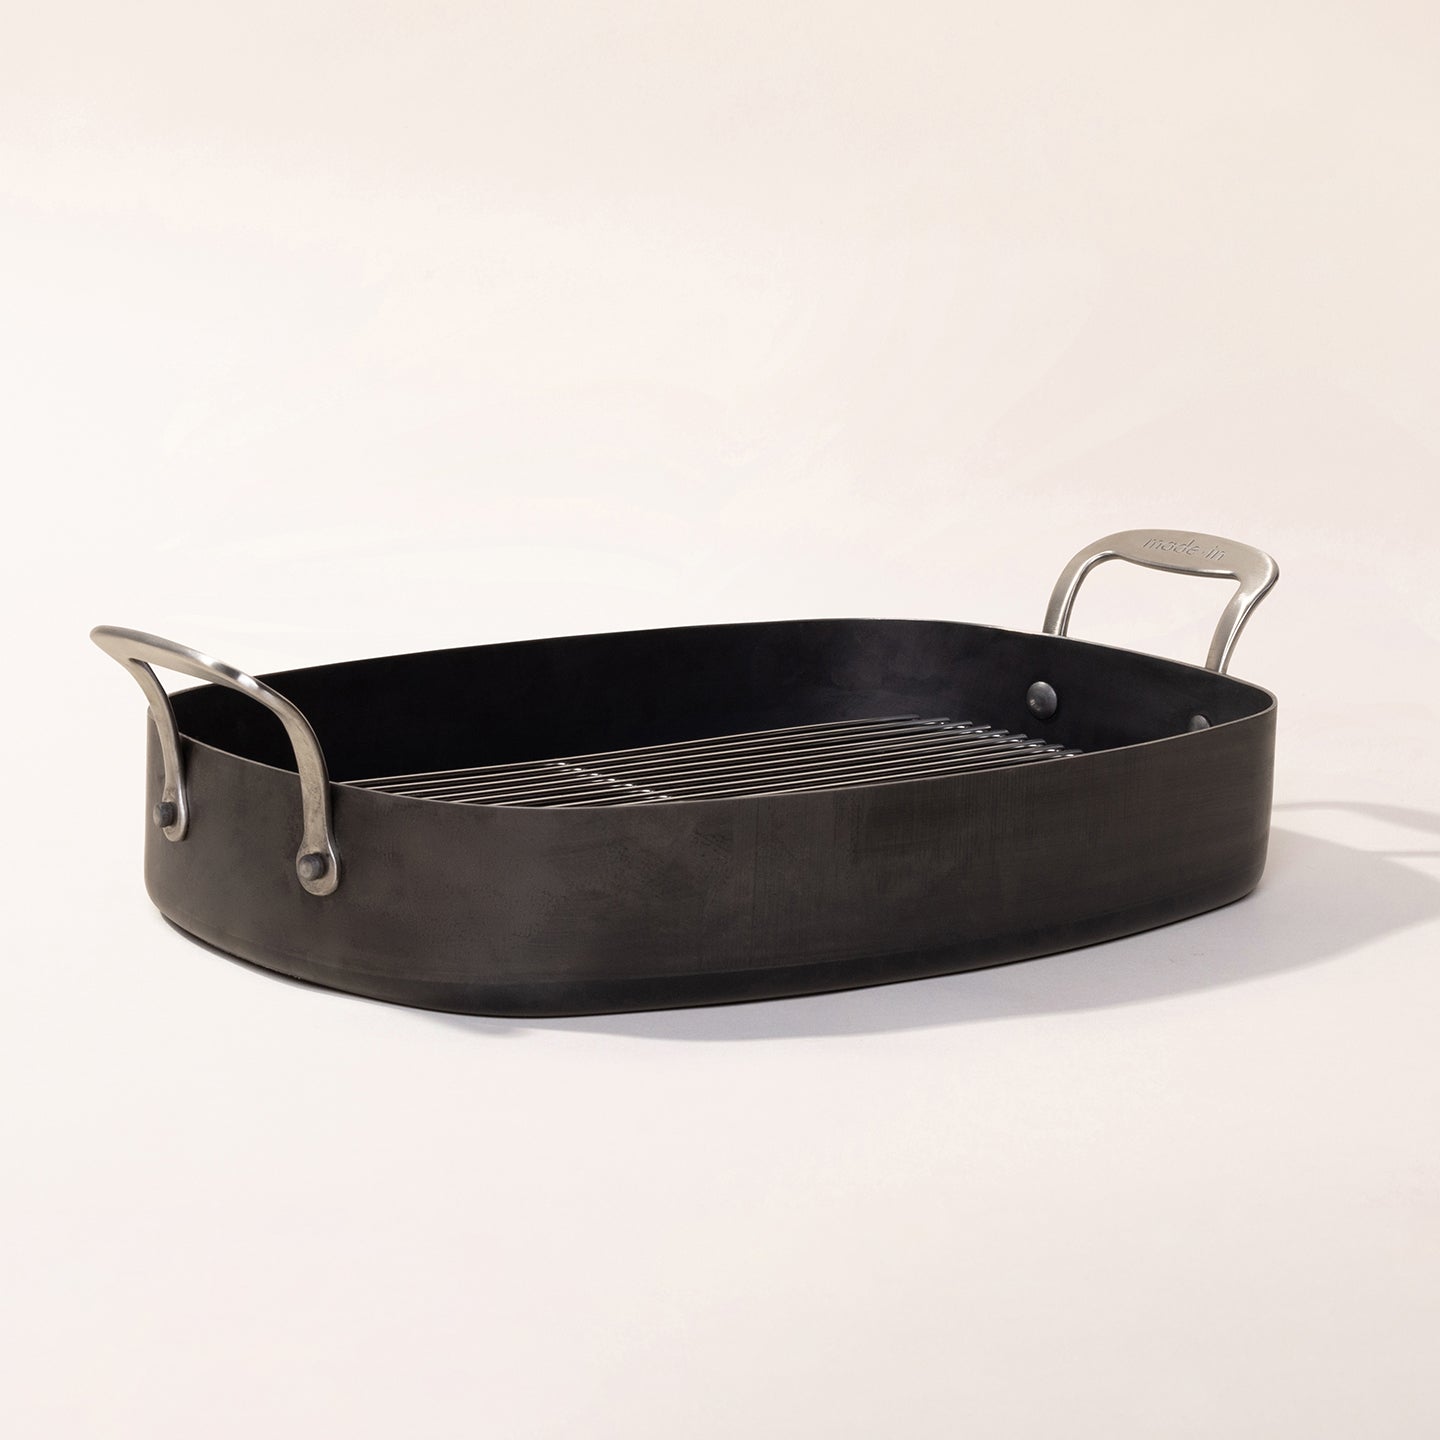 9 x 13 Roasting Pan with Rack - CHEFMADE official store